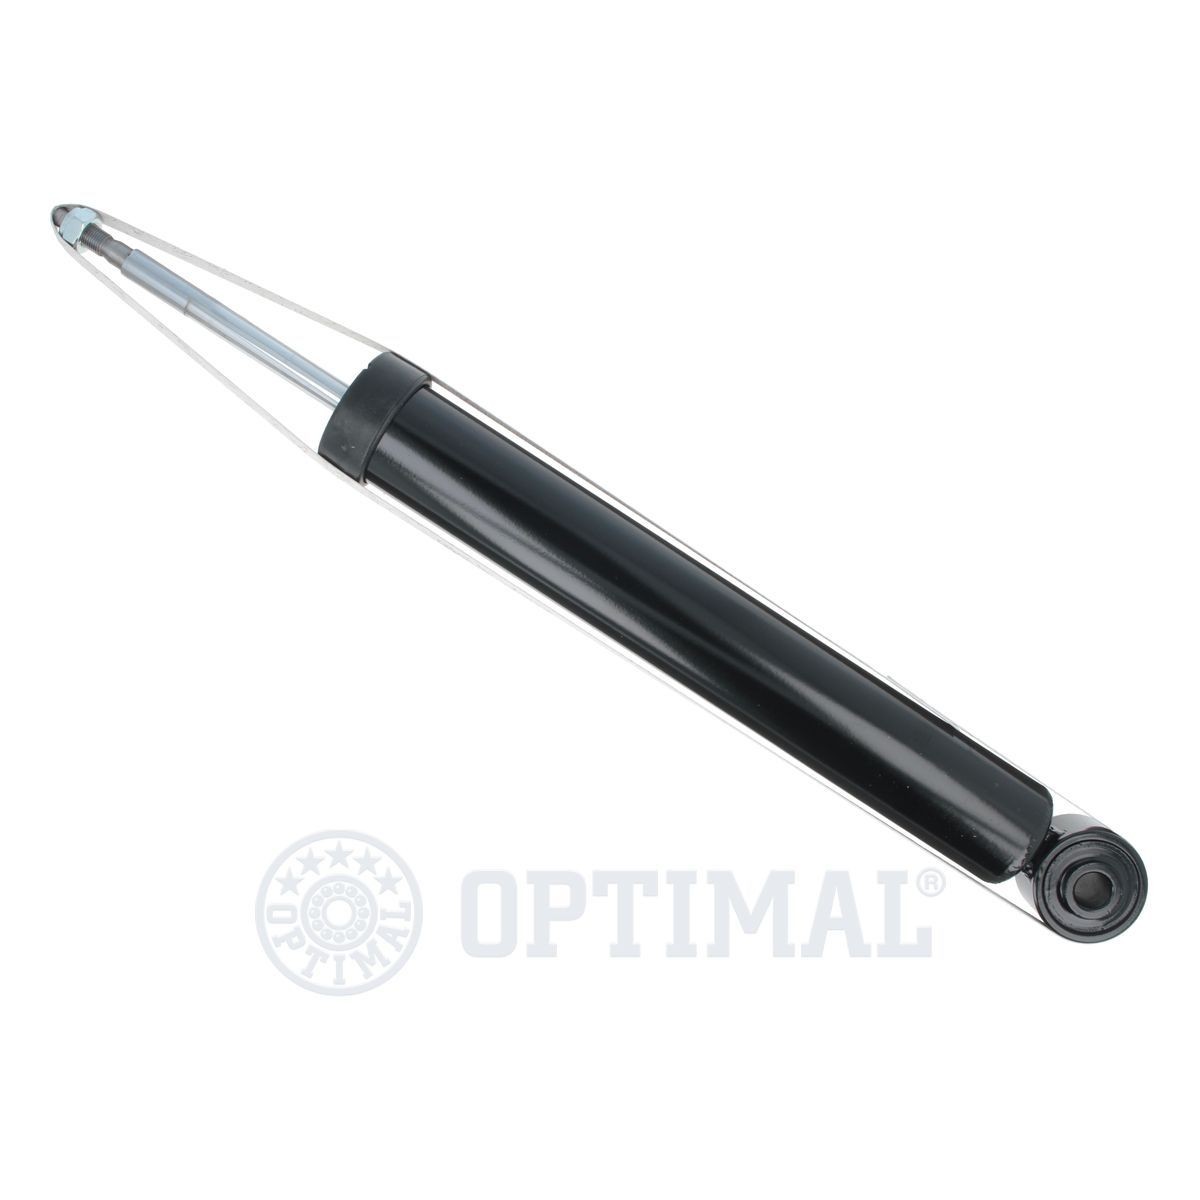 OPTIMAL Left, Right, Front Axle, Gas Pressure, Suspension Strut Insert, Top pin Shocks A-67978G buy